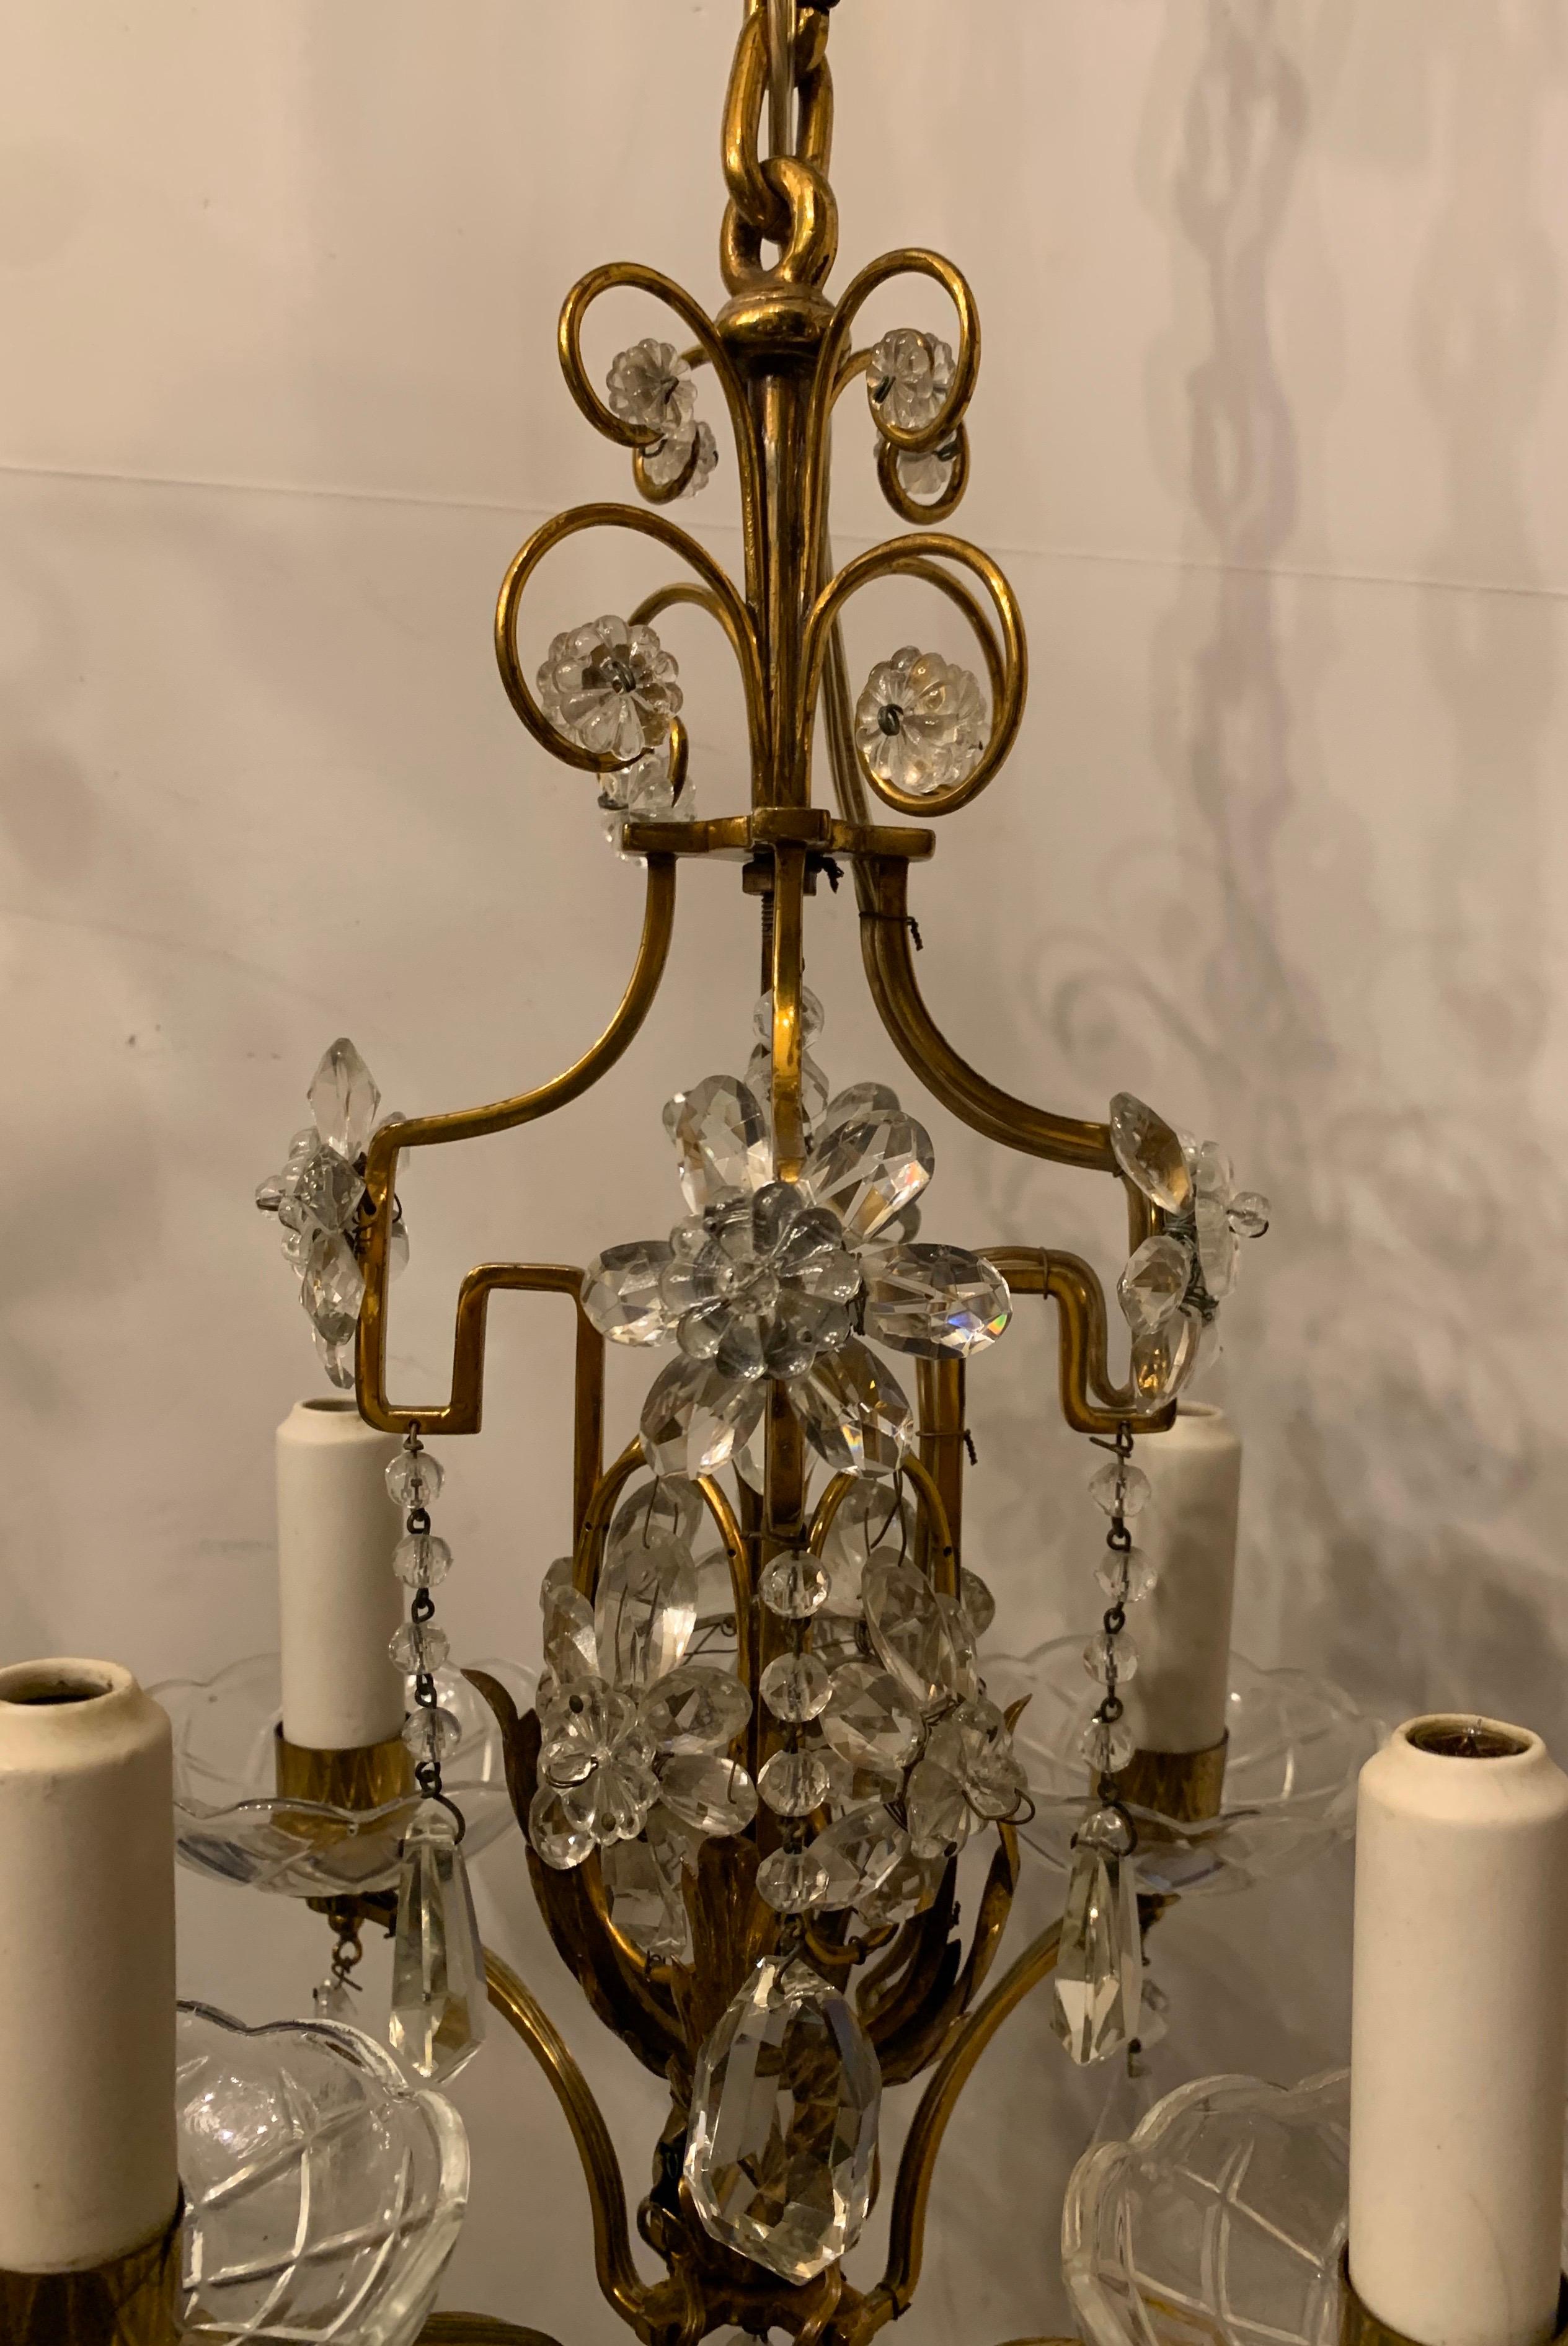 A wonderful Baguès style French brass & crystal beaded petite chandelier four-light fixture with a beautiful crown and surrounded by crystal flowers.
The perfect piece for any small space.